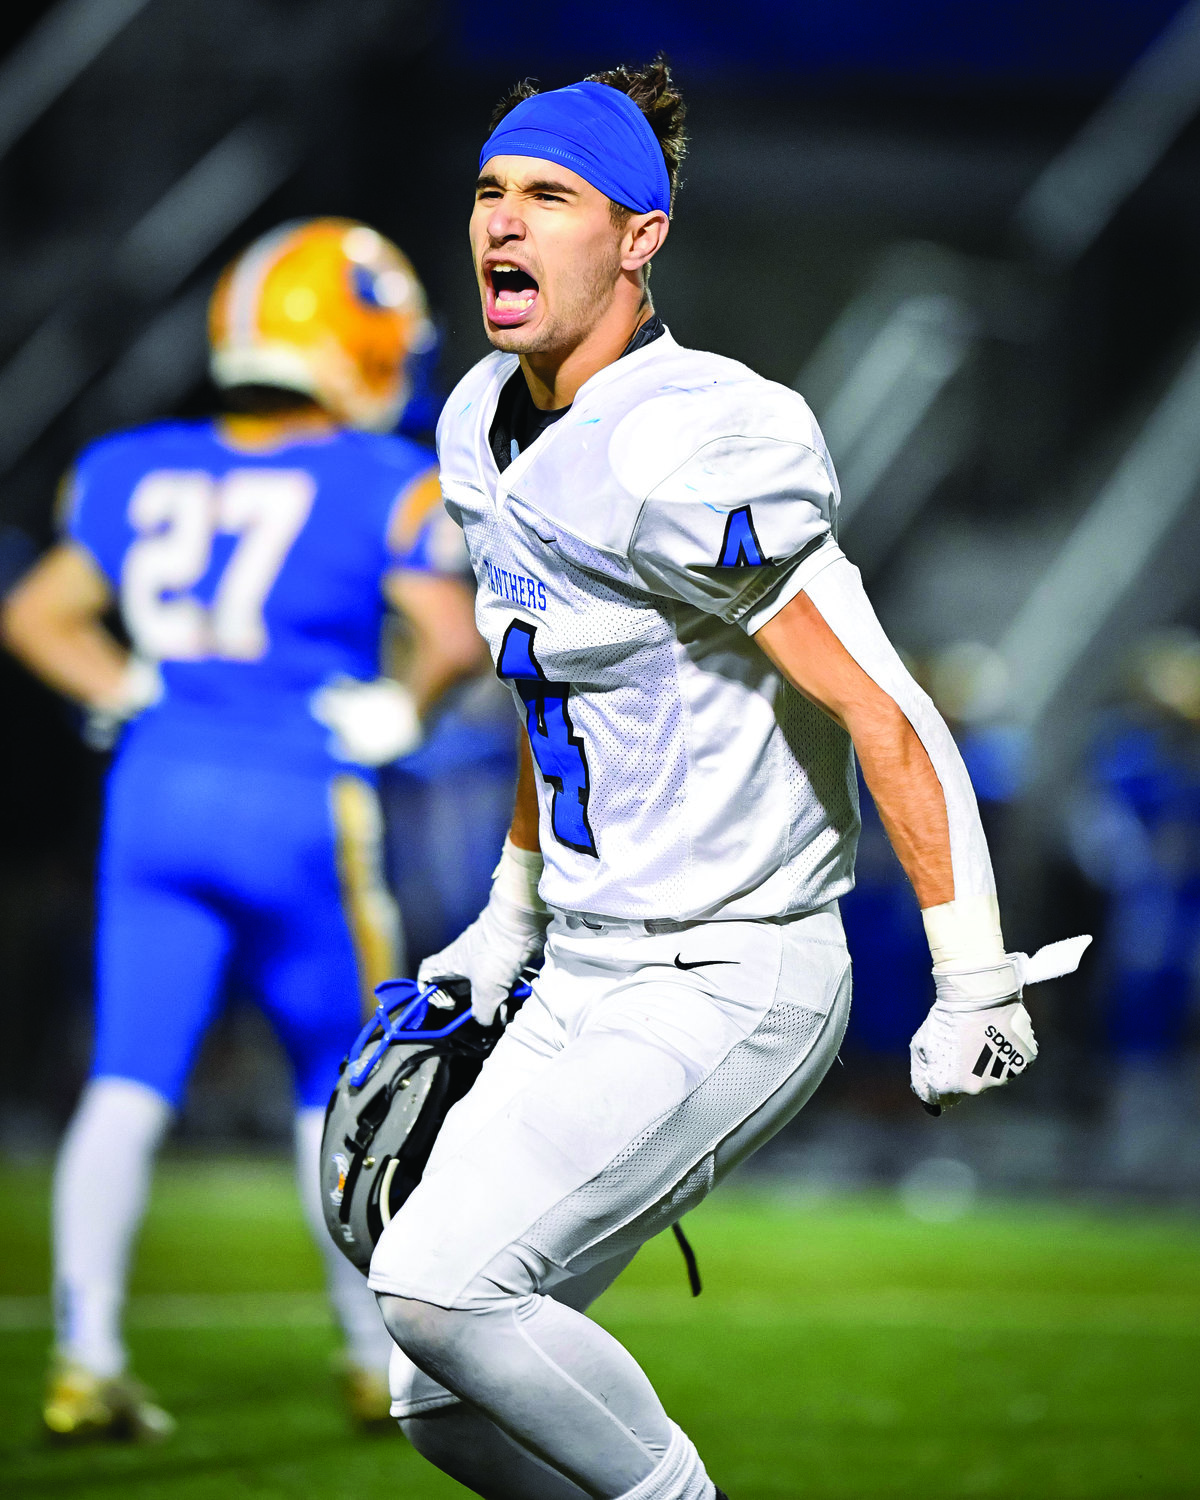 Quakertown’s John Eatherton shouts out after the final snap of the game.